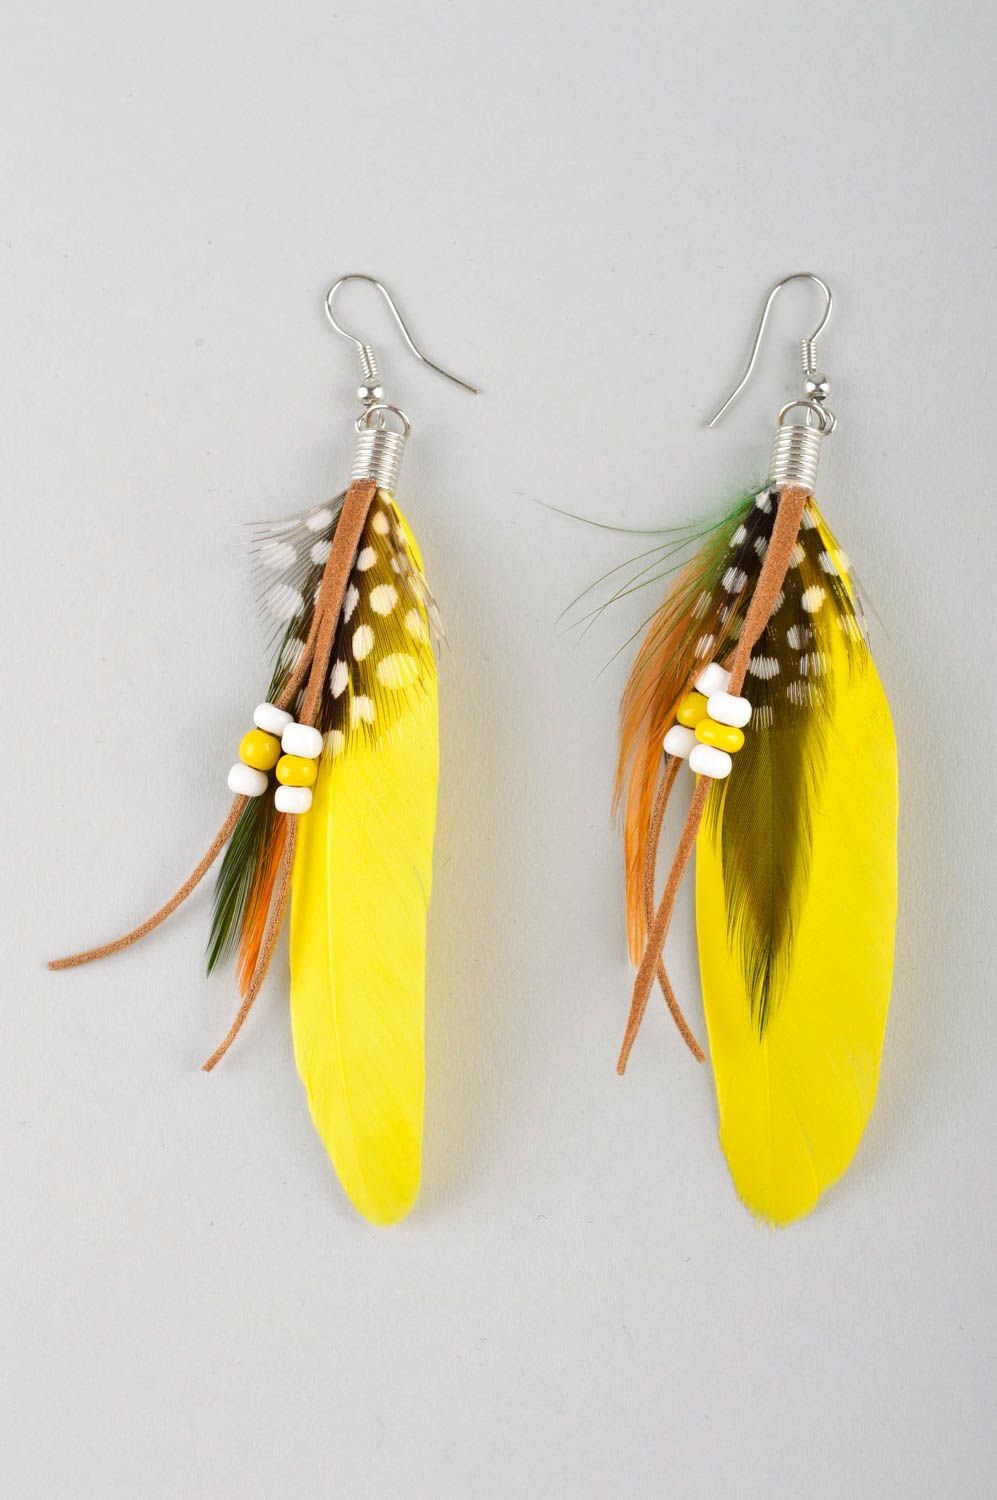 Handmade earrings with charms feather earrings long earrings fashion accessories photo 3